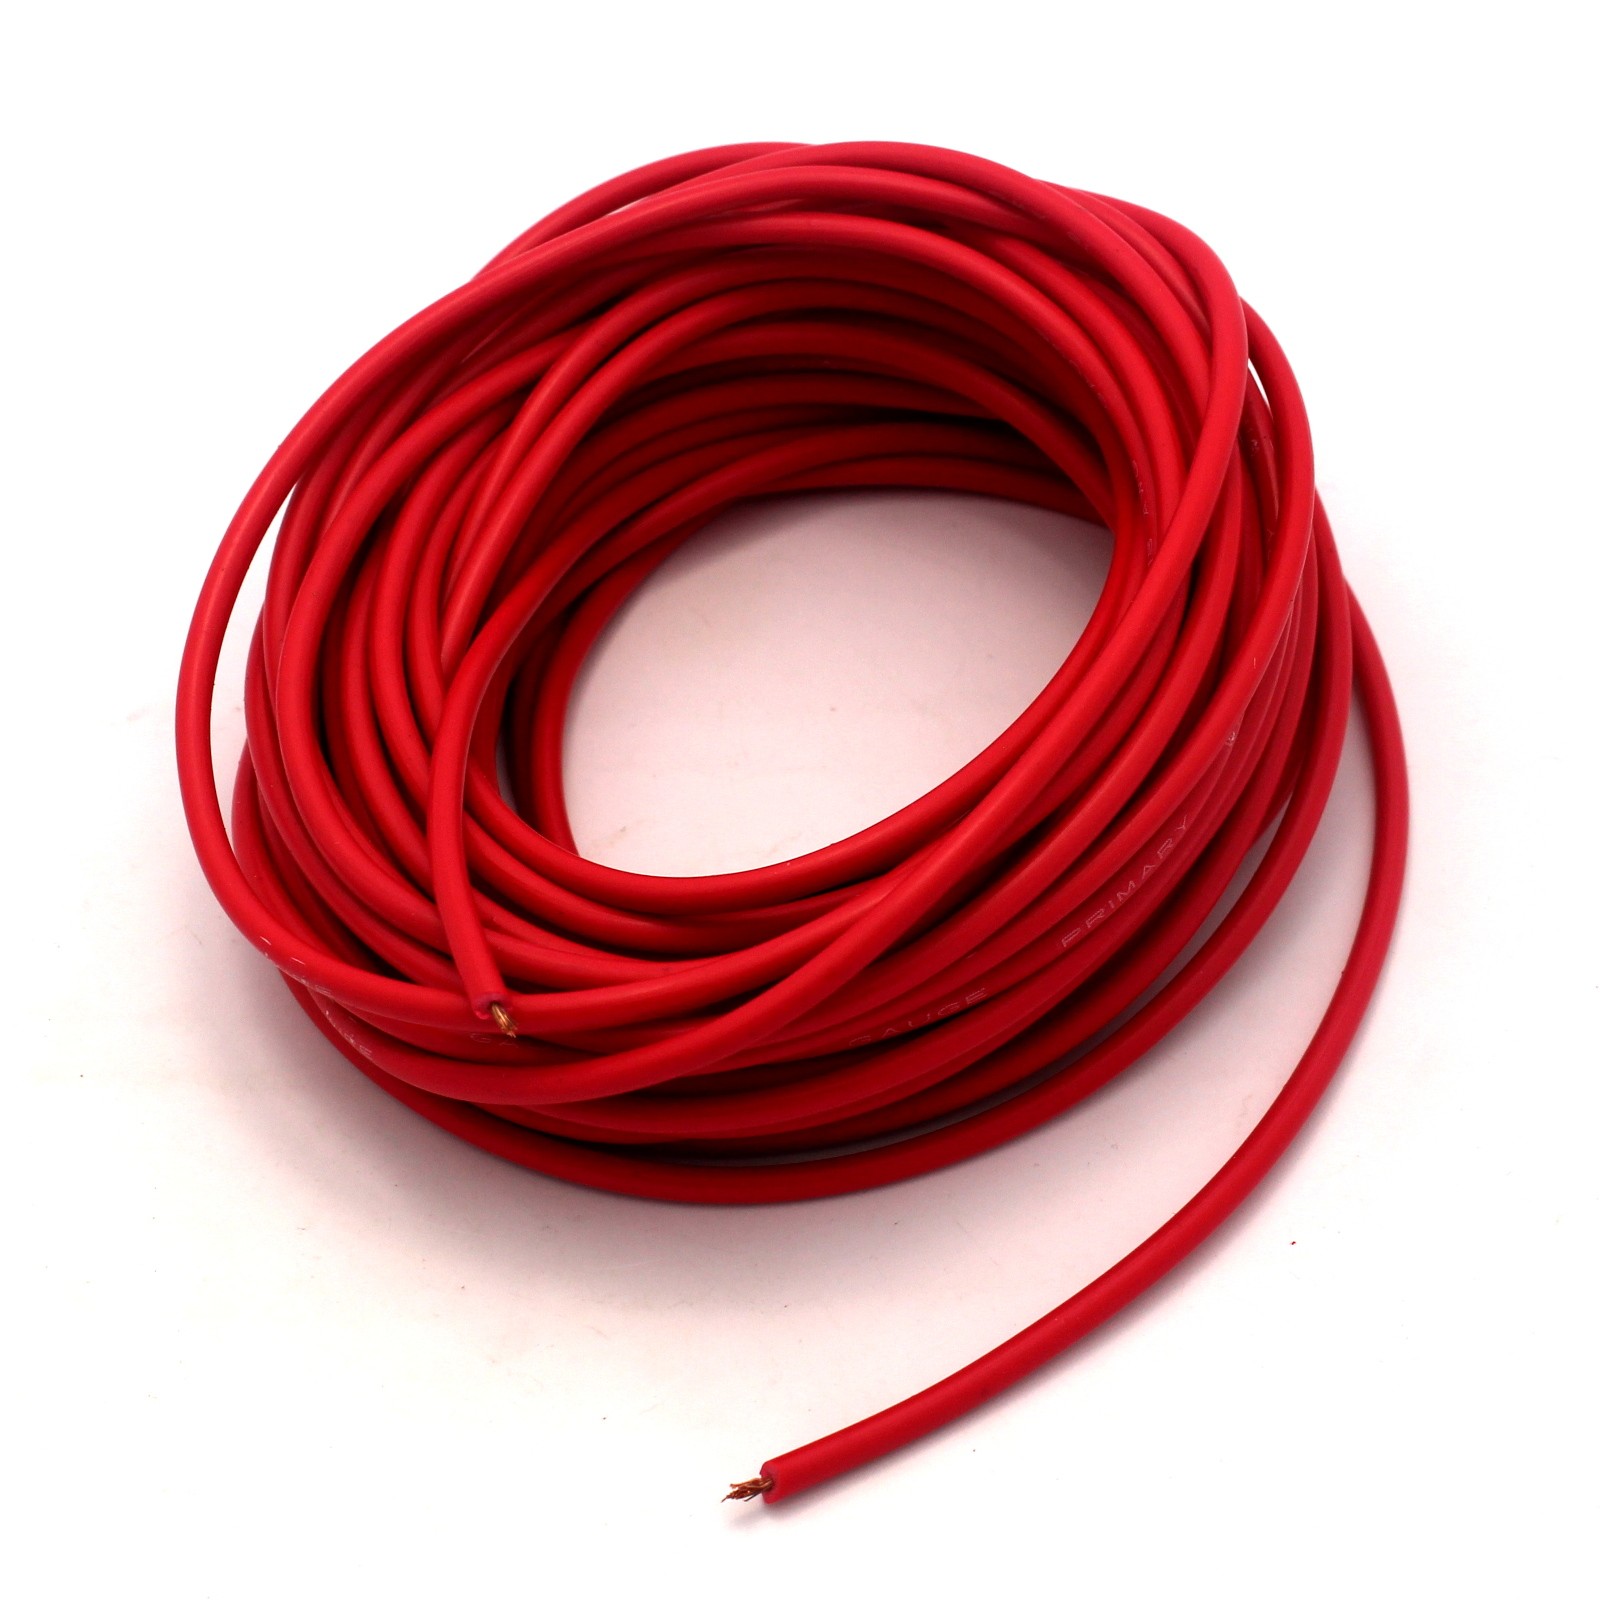 25' Foot,18 AWG Gauge Silver Plated Copper Wire Silicone High Temp Stranded USA 